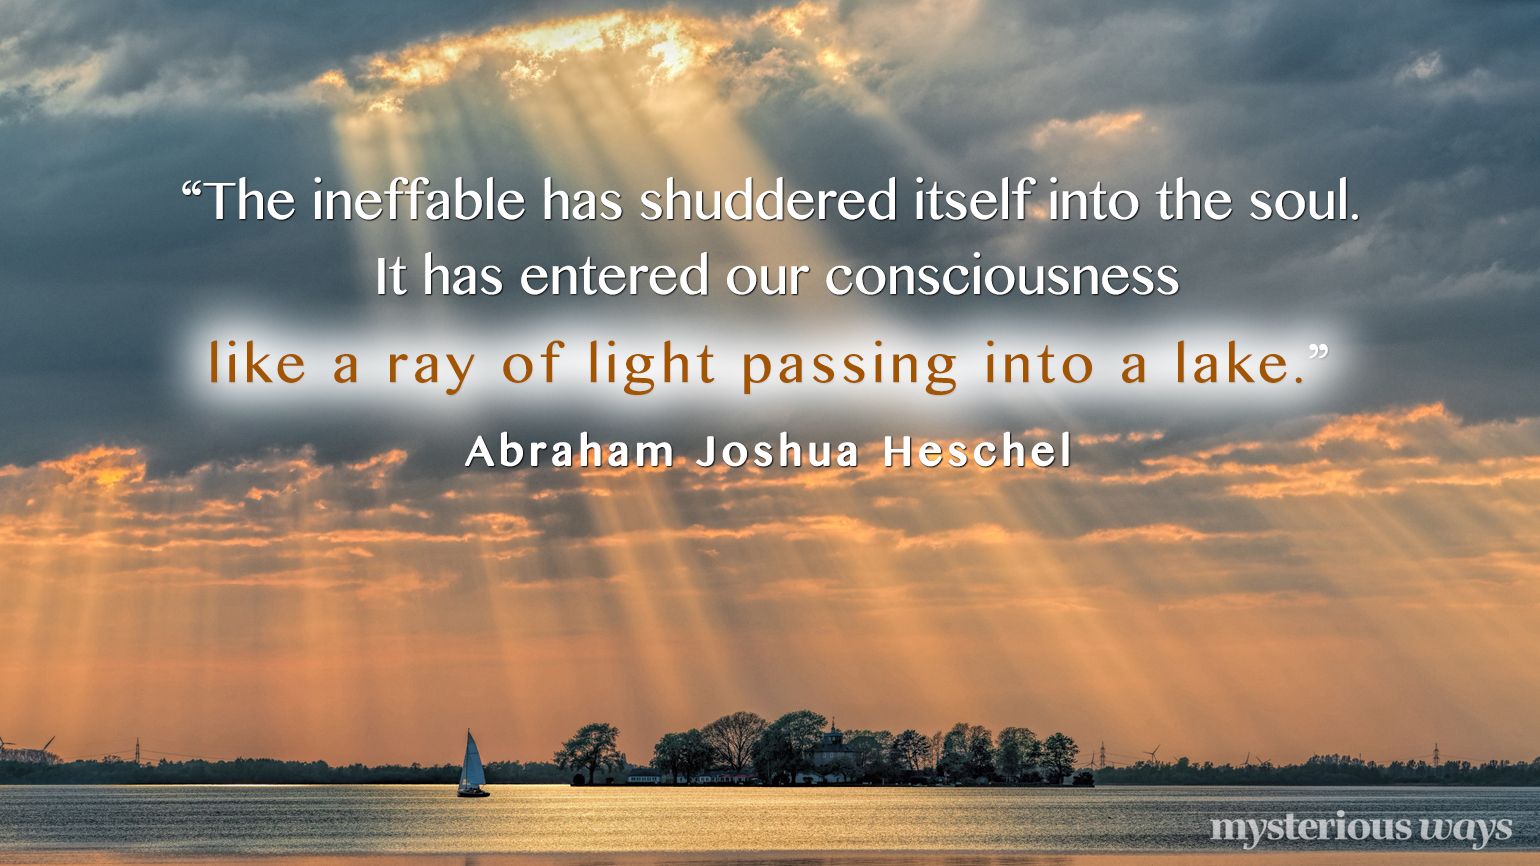 “The ineffable has shuddered itself into the soul. It has entered our consciousness like a ray of light passing into a lake.”